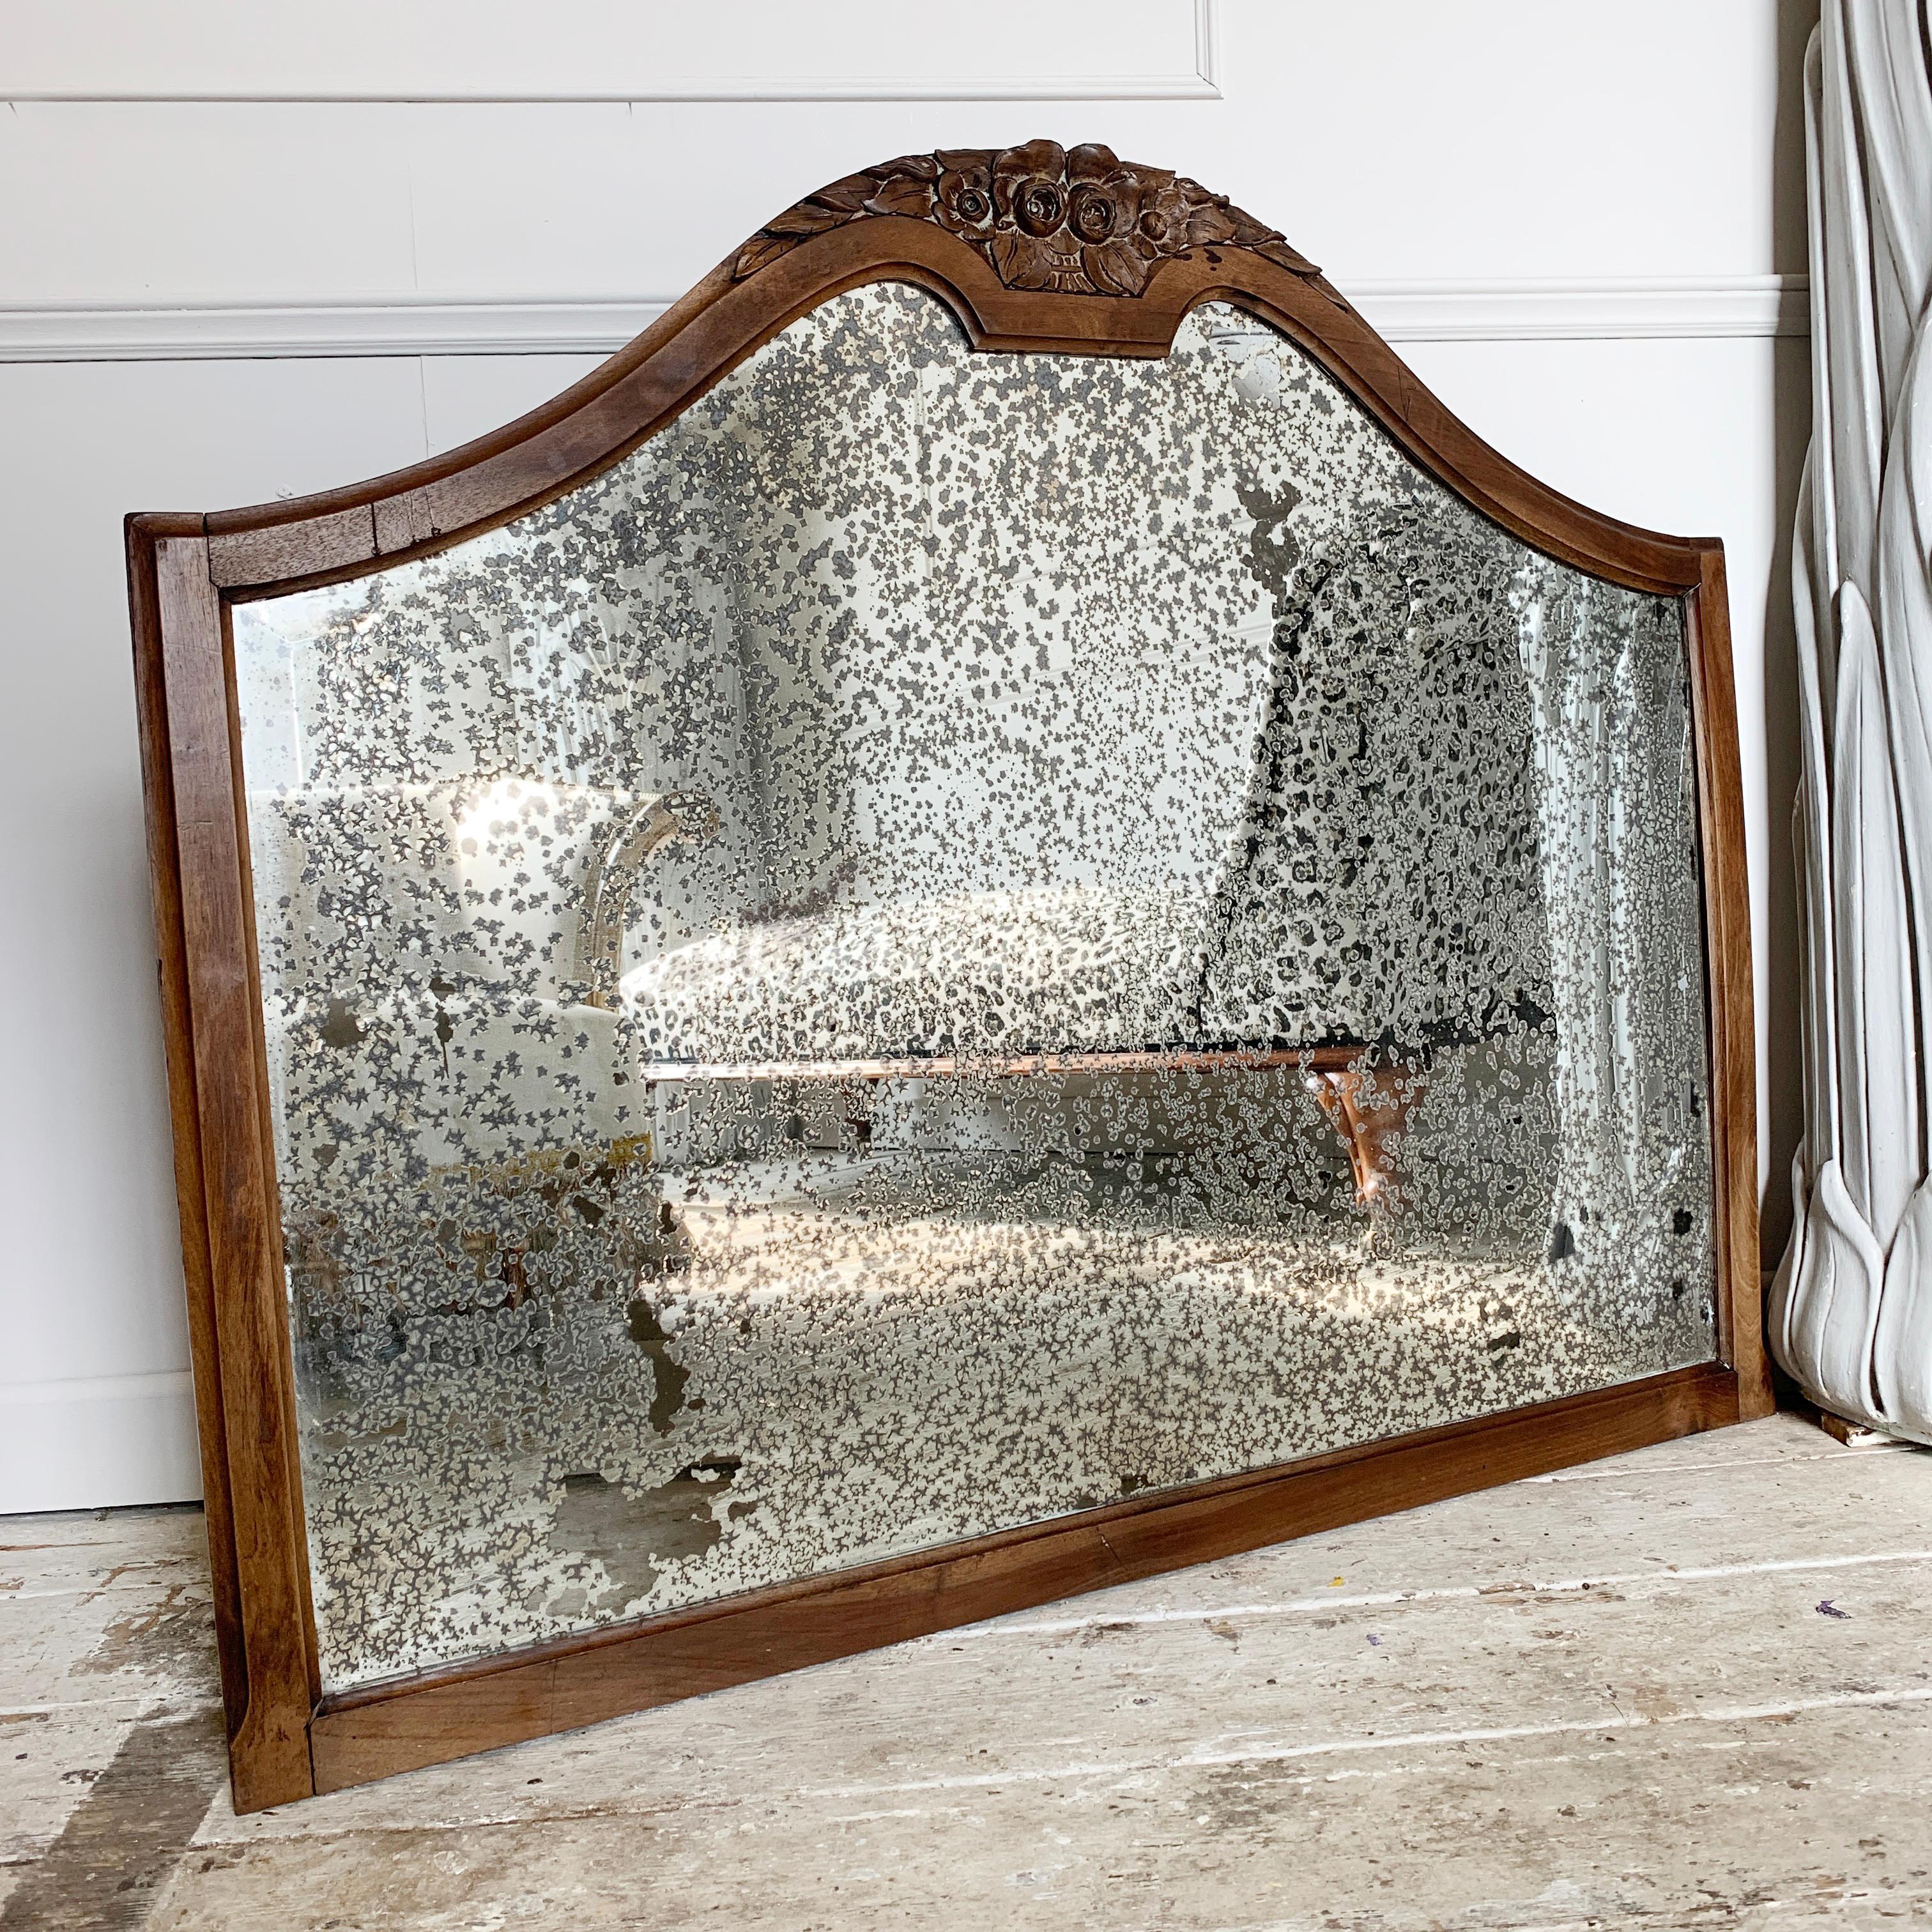 Large Victorian overmantle mirror, with carved fauna decorative crest

The silver backed plate is one of the most fabulously foxed examples we have encountered, giving this mirror a character that makes it a dream interiors piece

One side of the